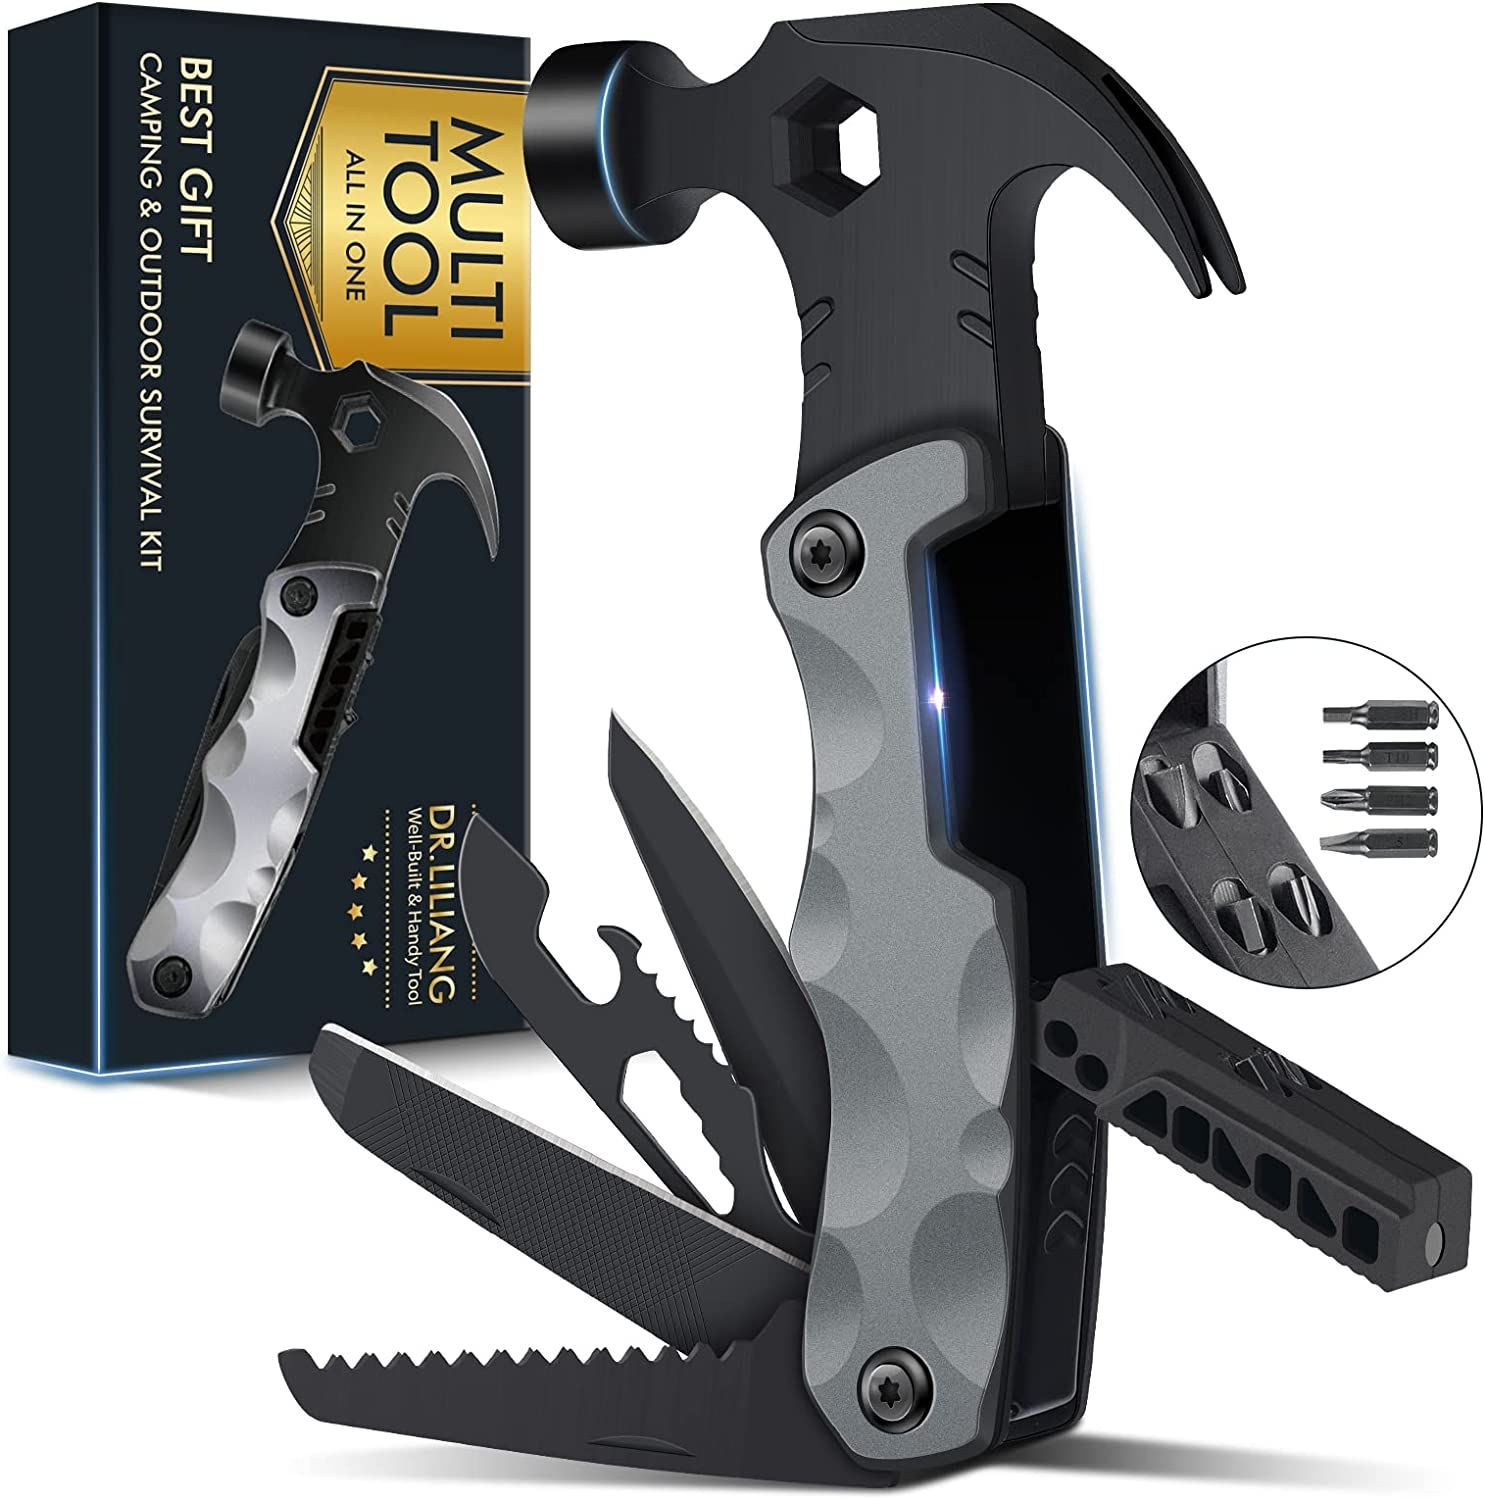 Hammer　13　Hyper　in　Accessories　Camping　Multitool　Gizmo